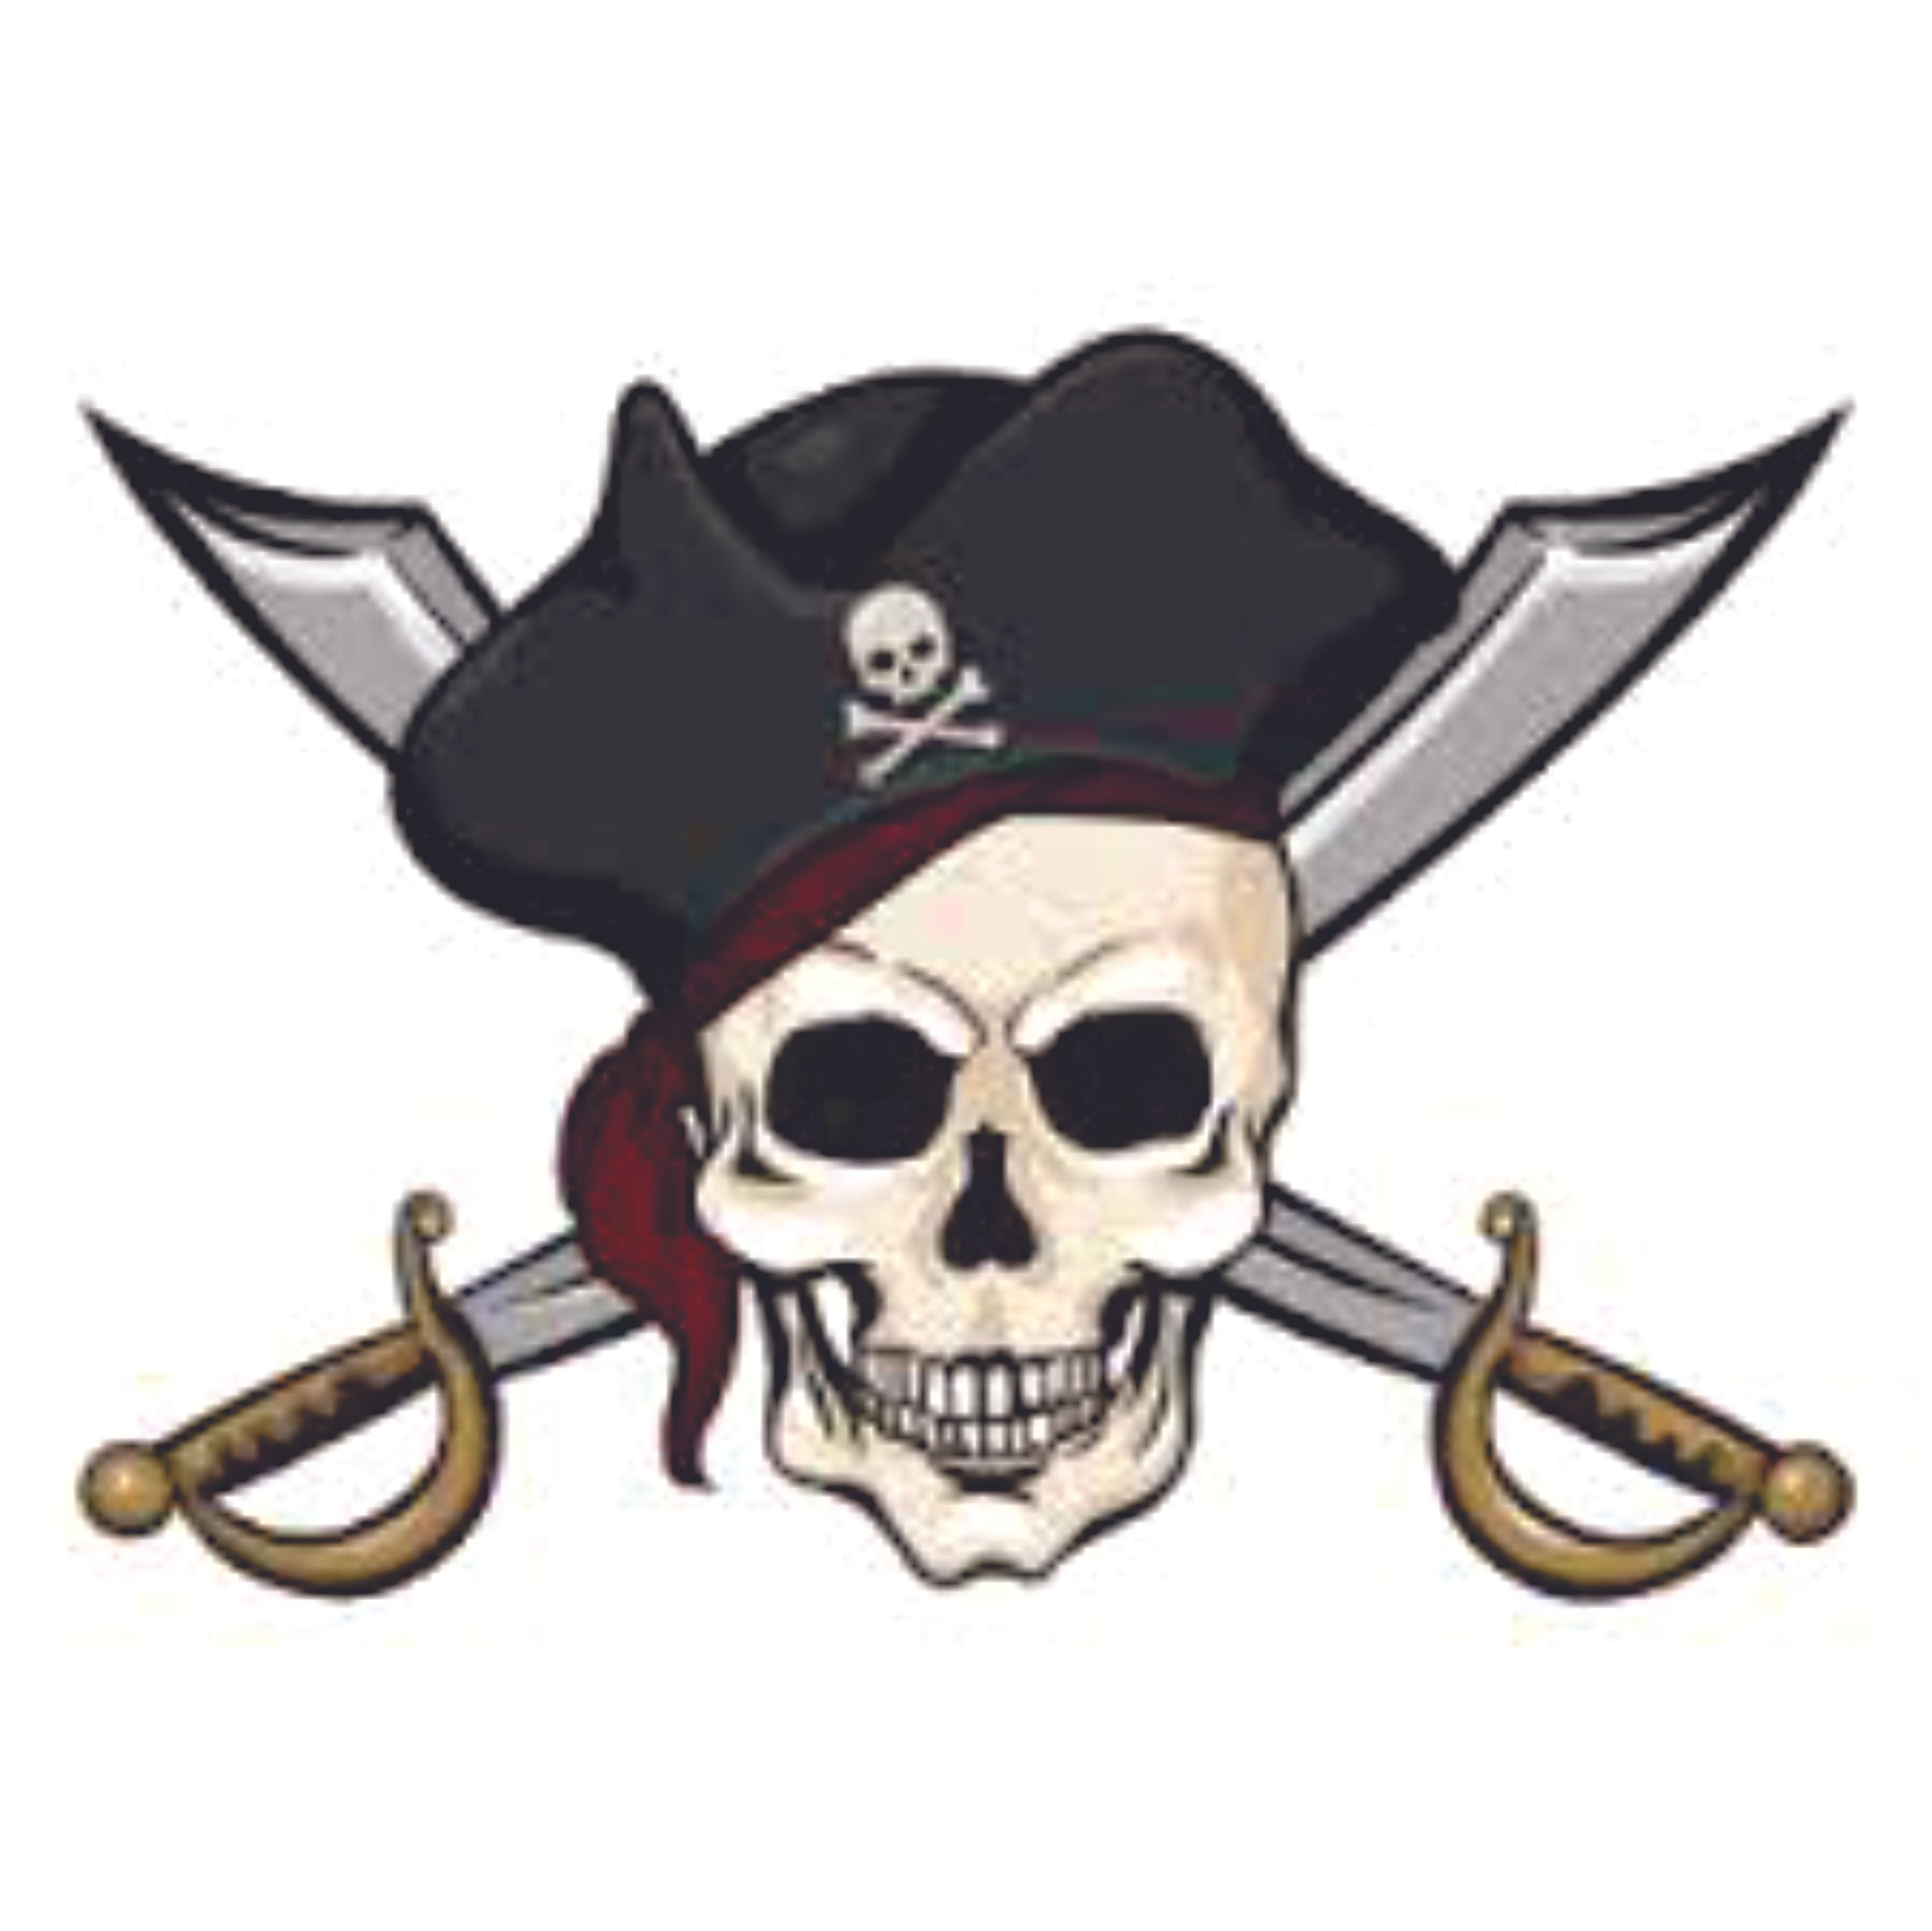 Skull & Crossbones Pirate Wall Art Decals/Stickers Various Colours & Sizes 